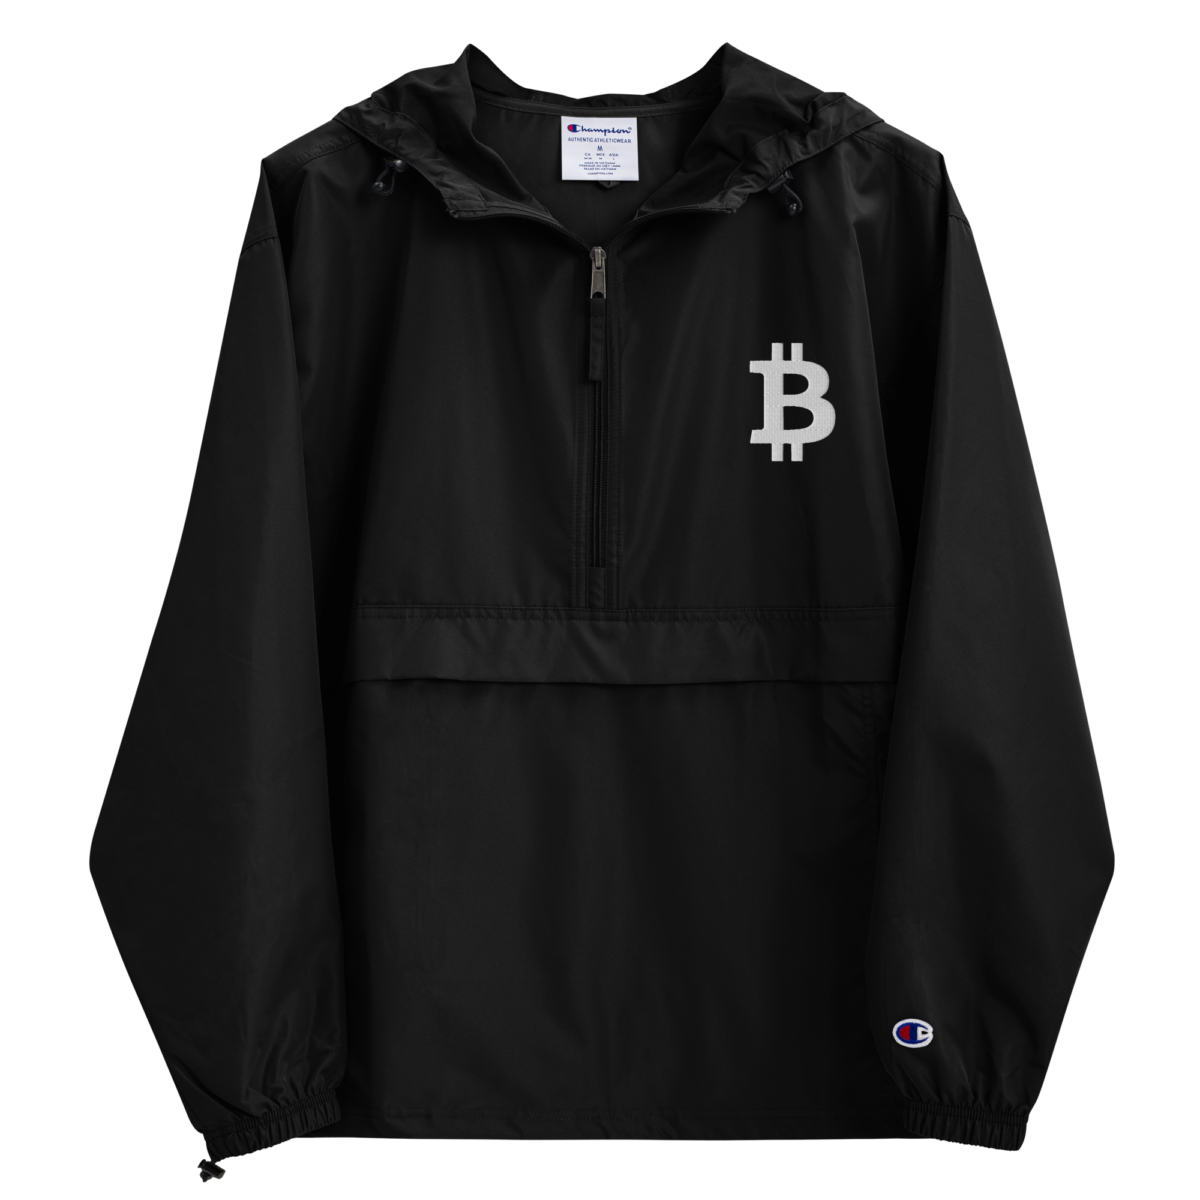 embroidered champion packable jacket black front 631f52b593afb - Bitcoin Champion Packable Jacket